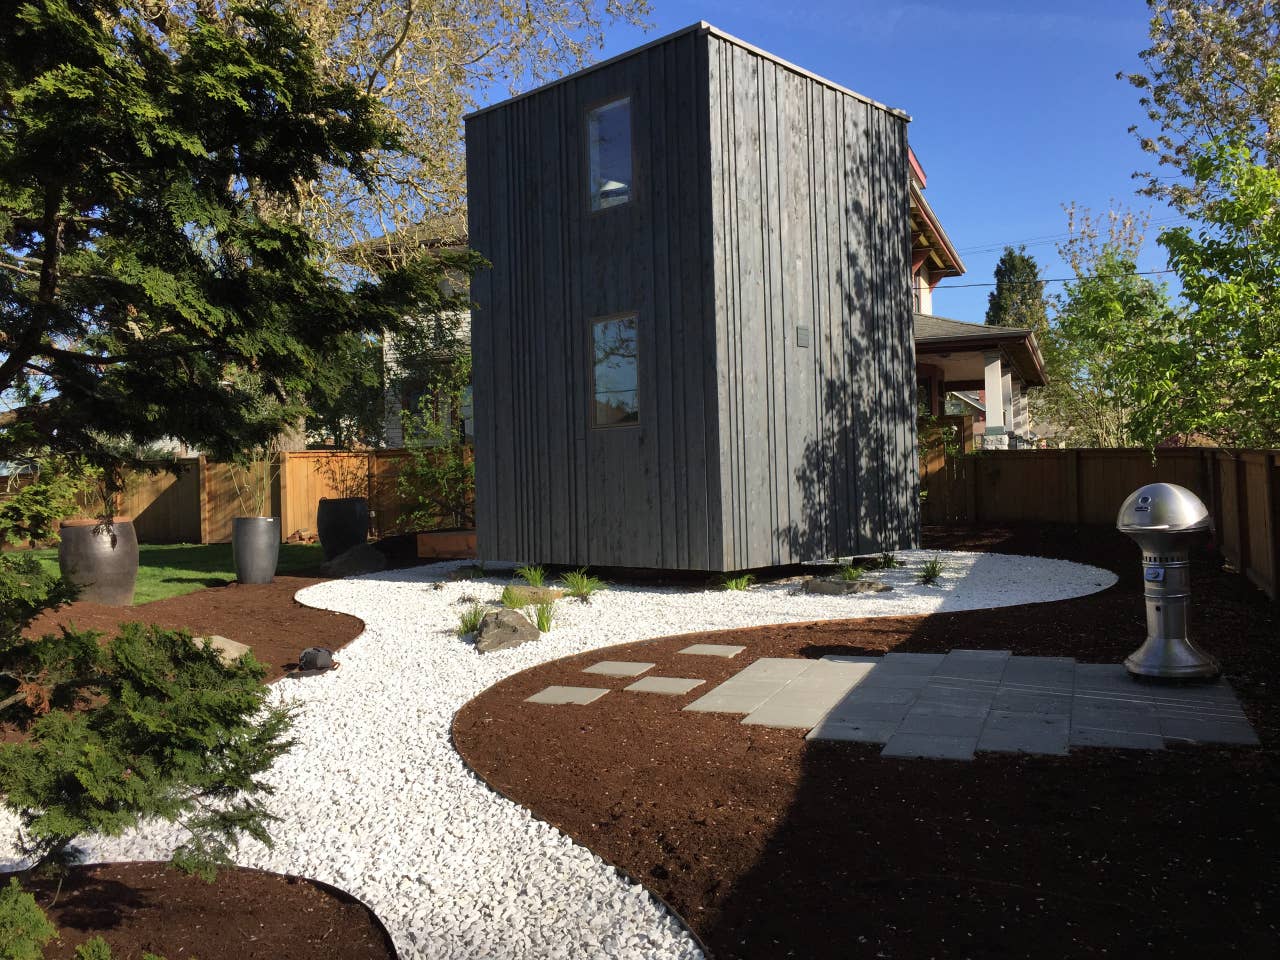 Rotating Tiny Home In Portland Available For Rent Insidehook